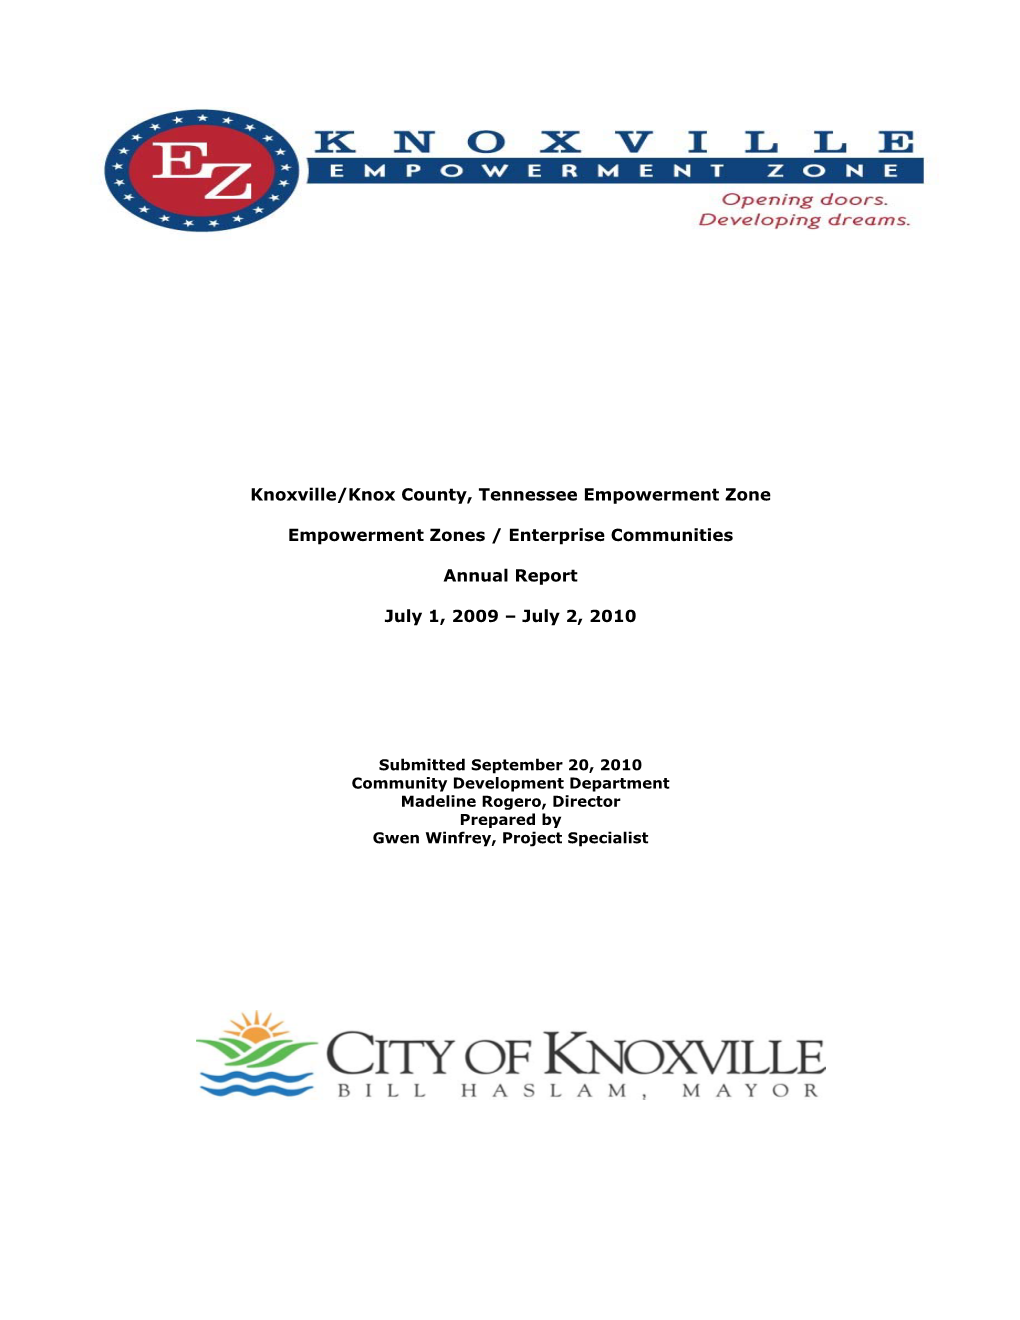 Knoxville/Knox County, Tennessee Empowerment Zone Empowerment